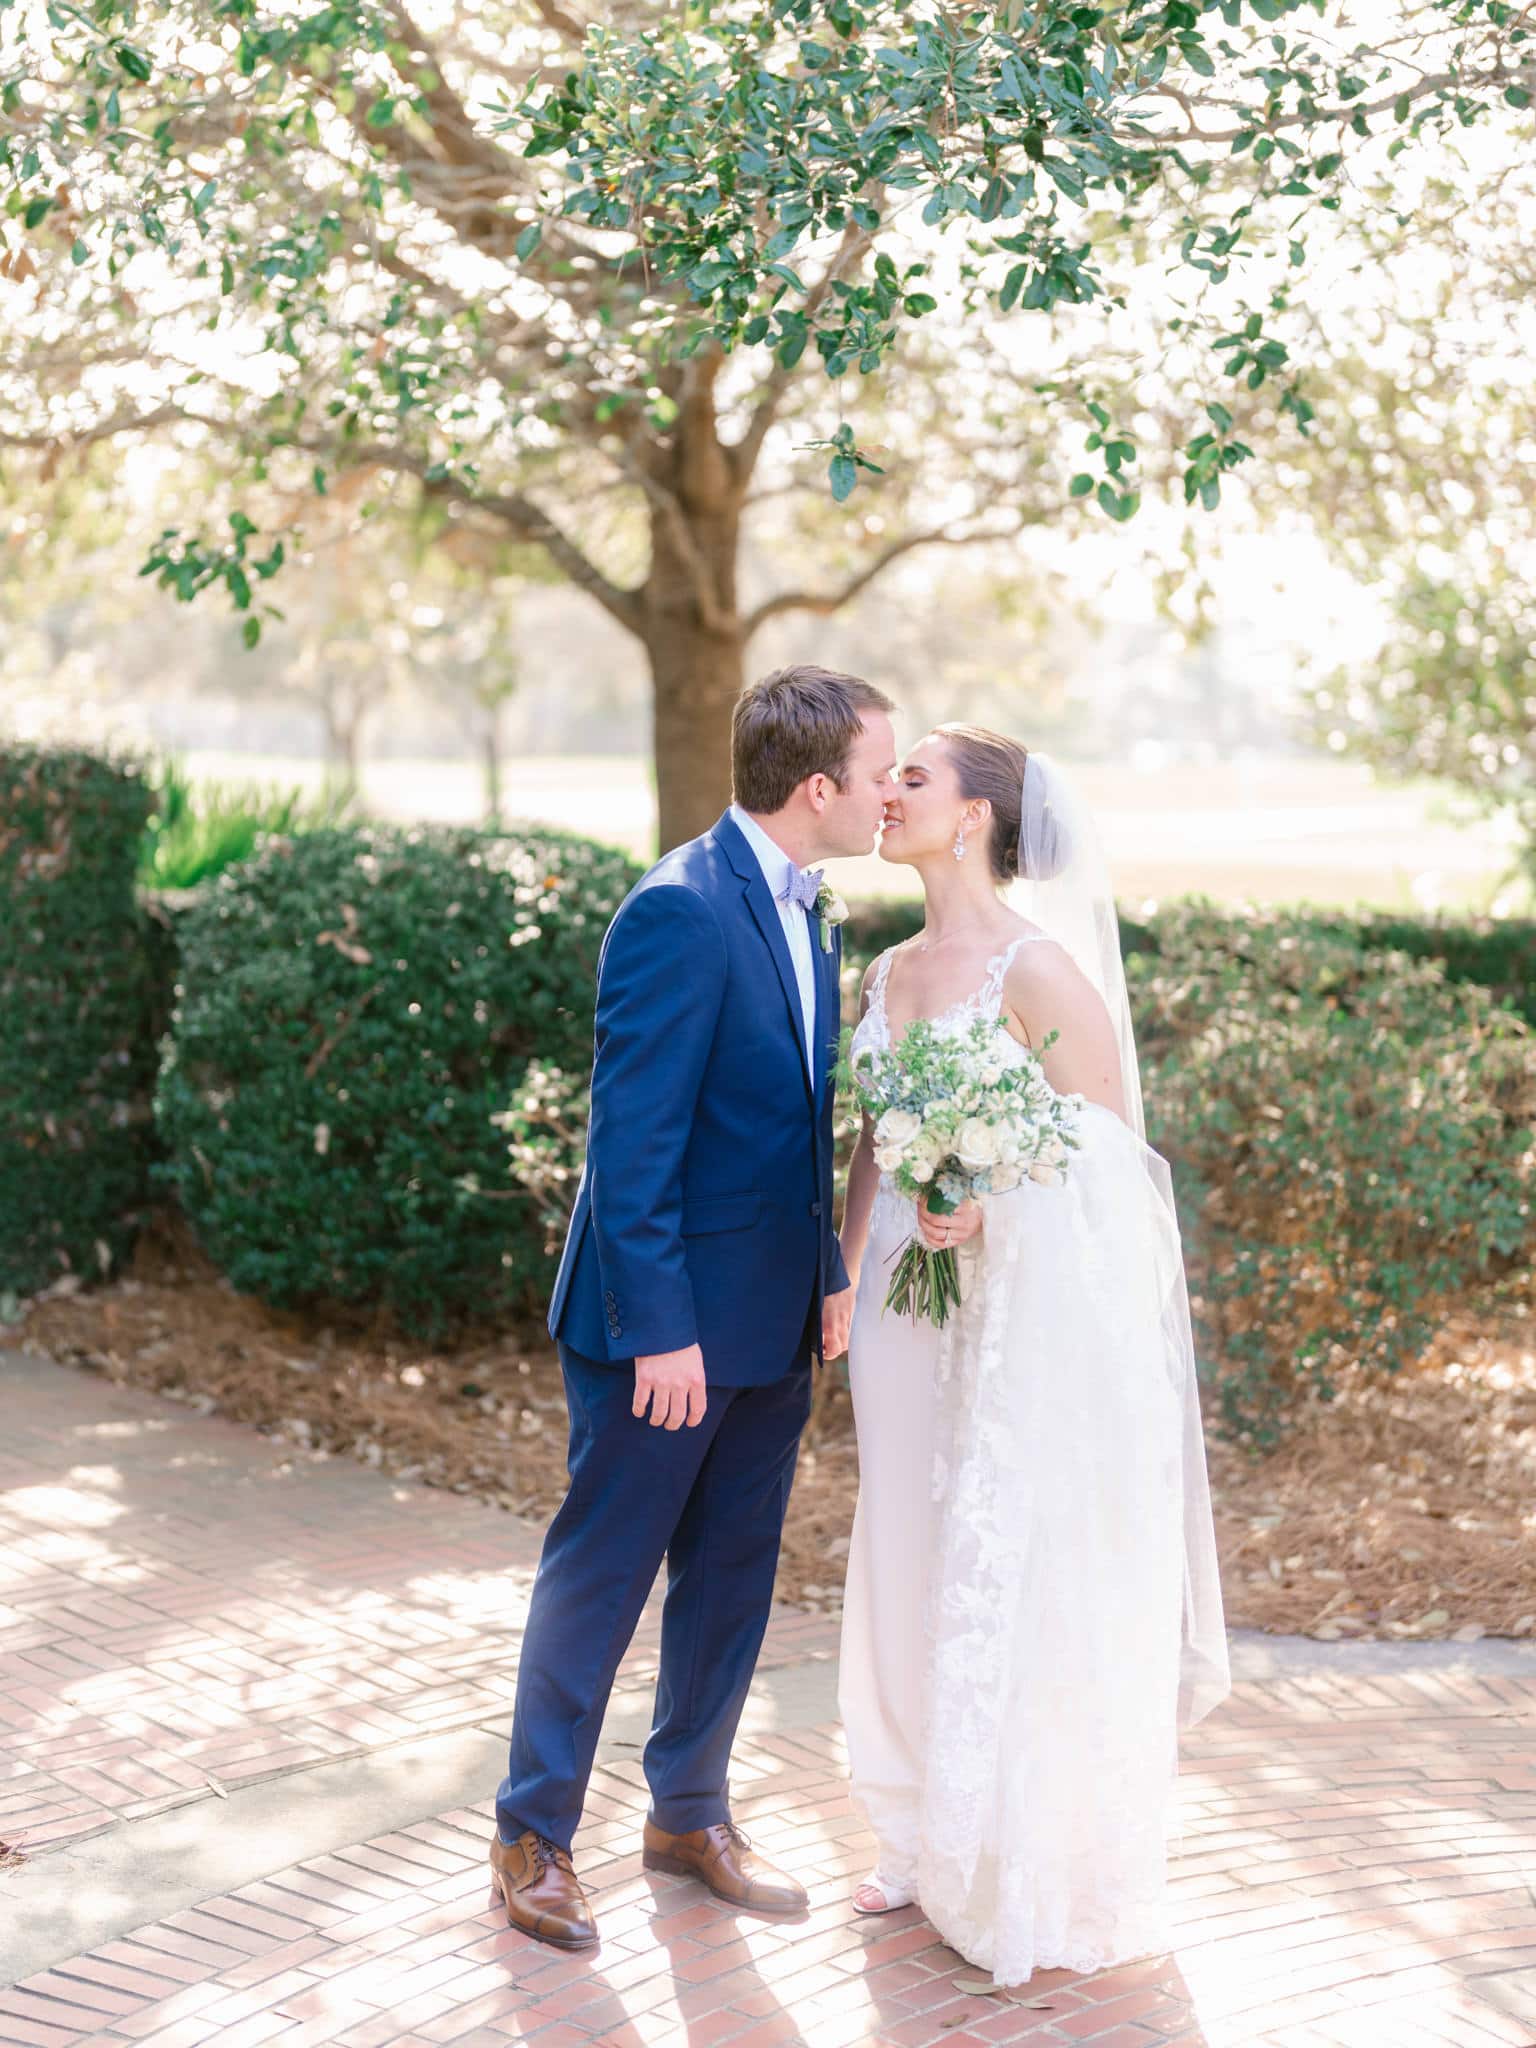 Spring Wedding at Pine Lakes Country Club in Myrtle Beach